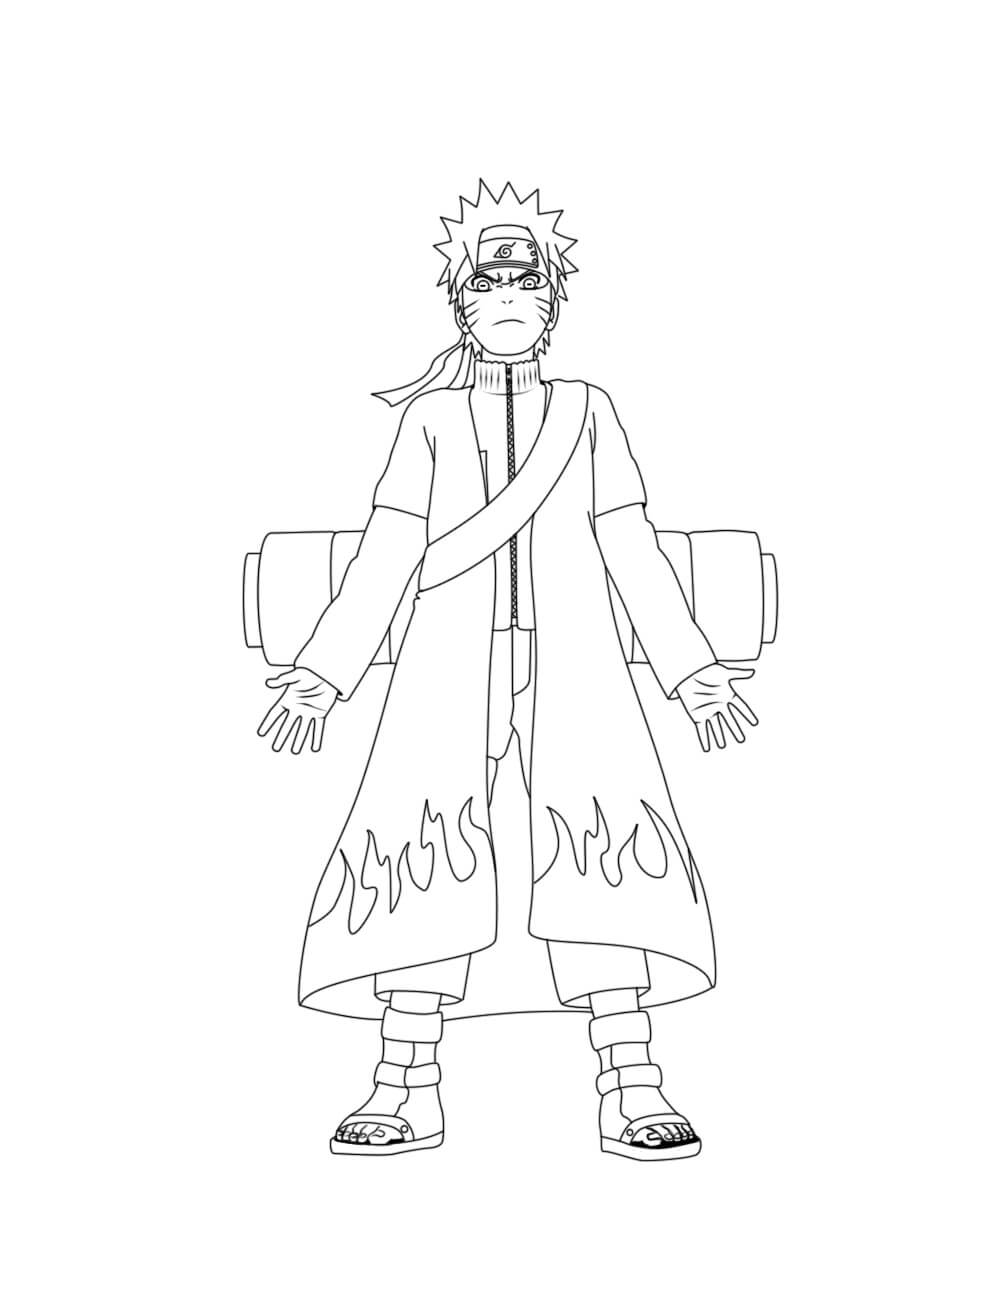 Naruto State of the Sage